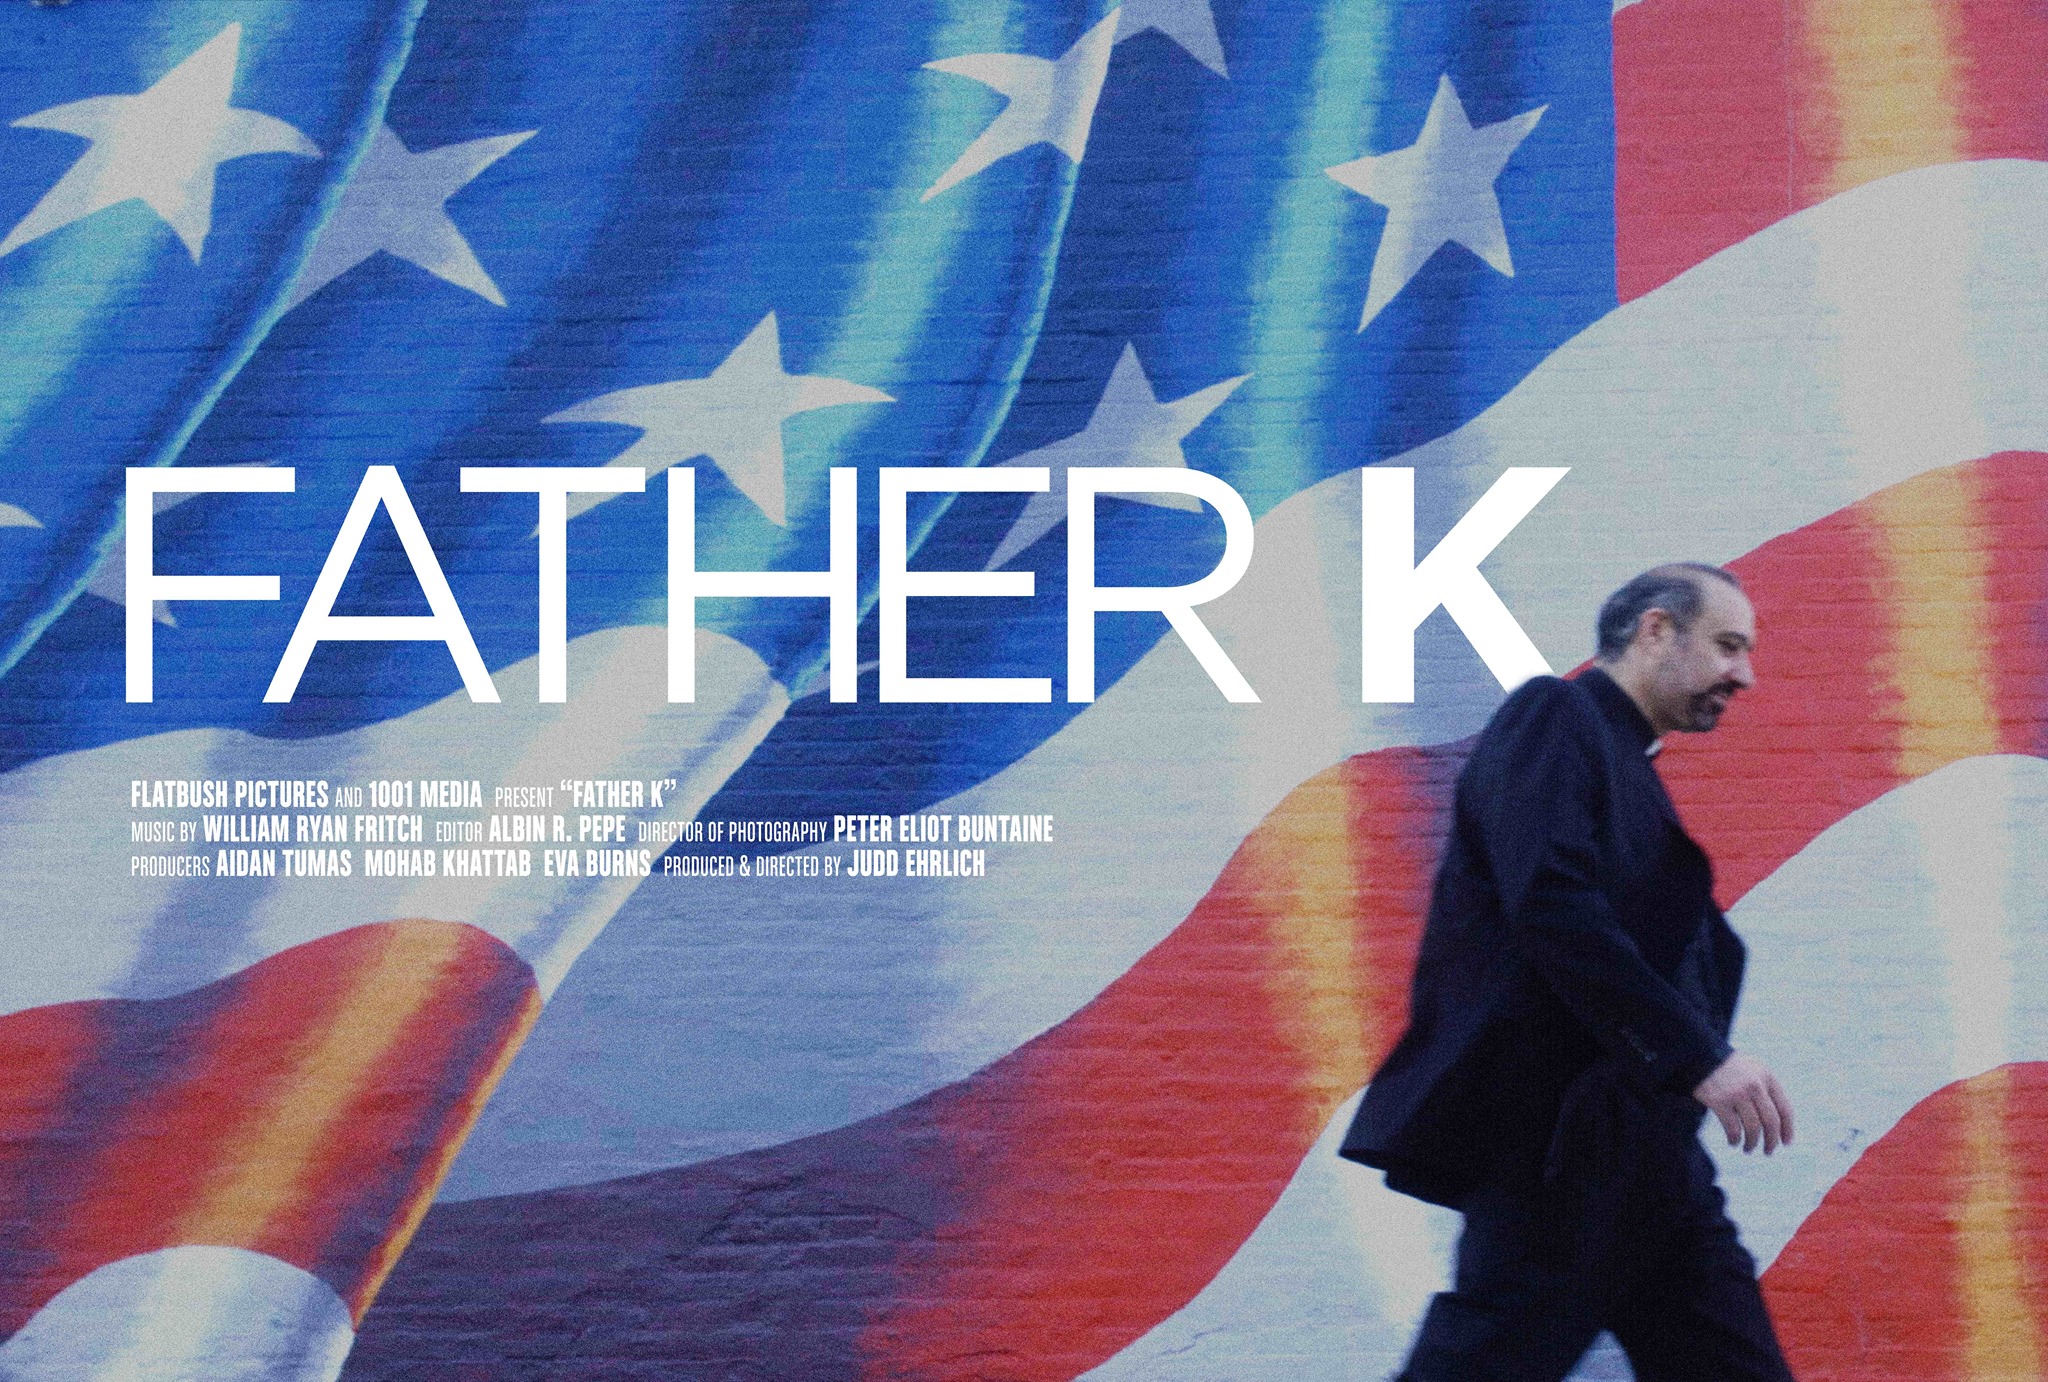 The official movie poster for “FATHER K,” the documentary which looks at the Rev. Khader El-Yateem’s 2017 City Council run in Bay Ridge.